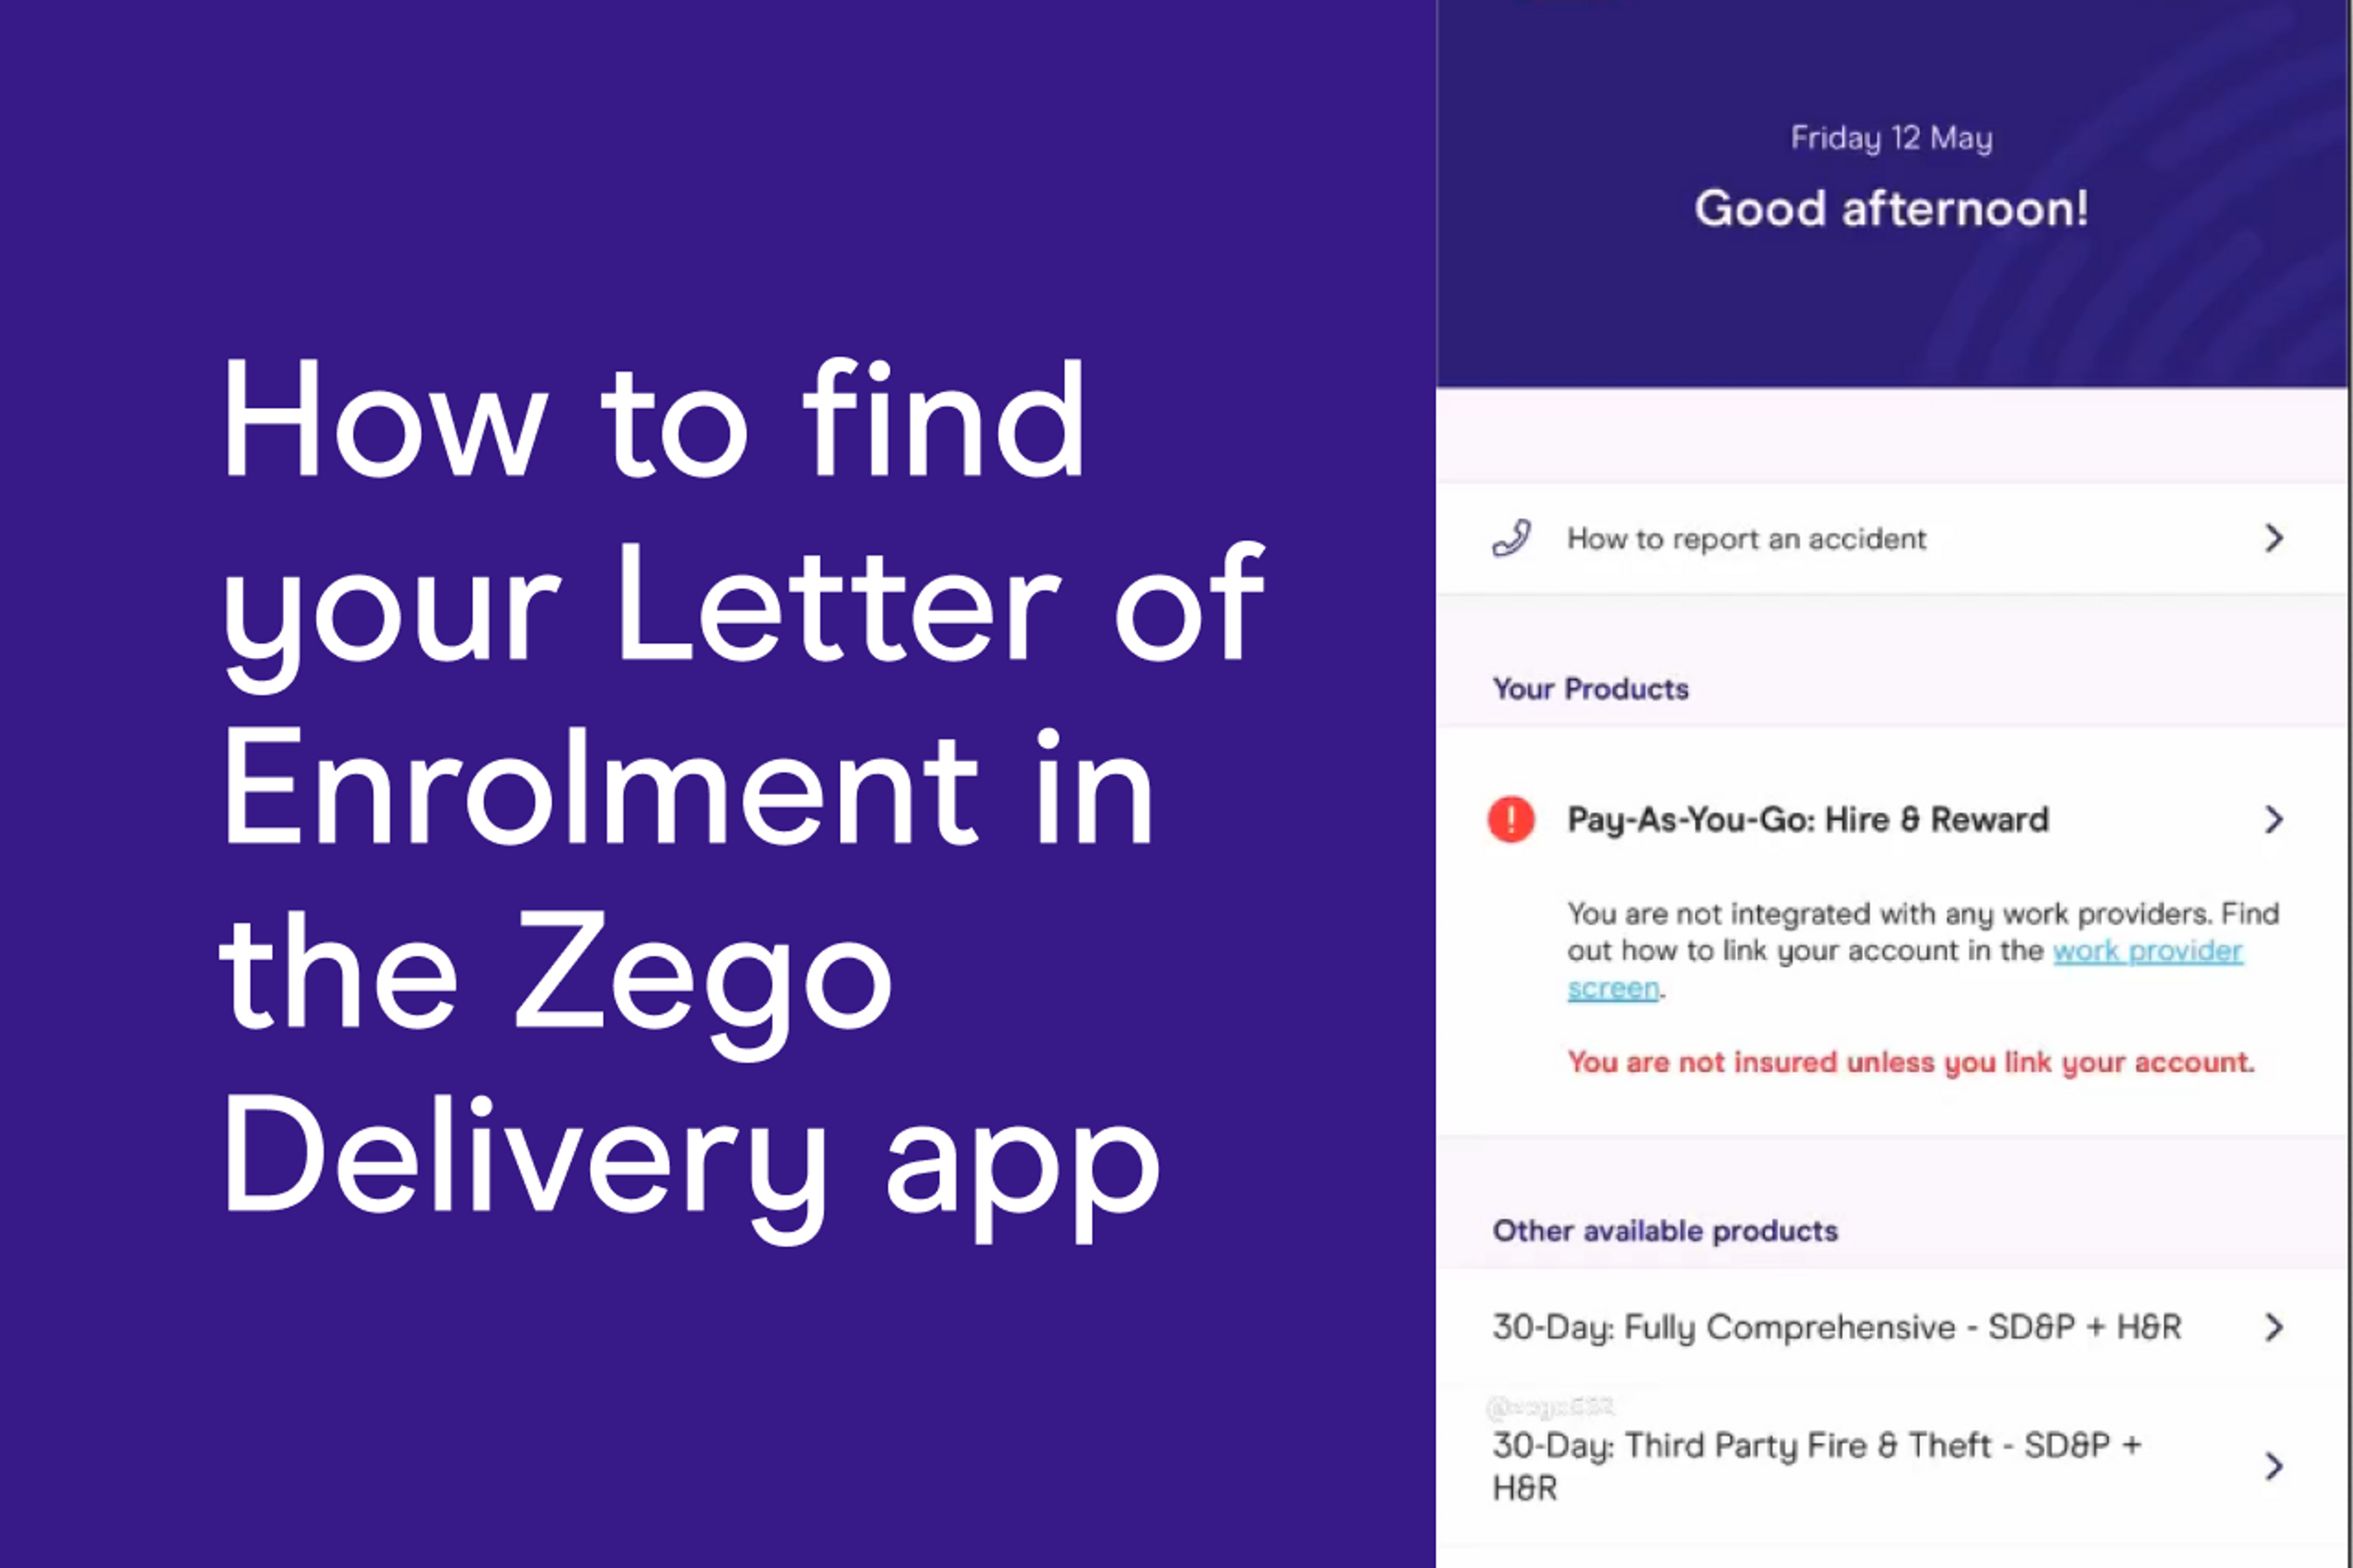 How to find your Letter of Enrolment in the Zego Delivery app